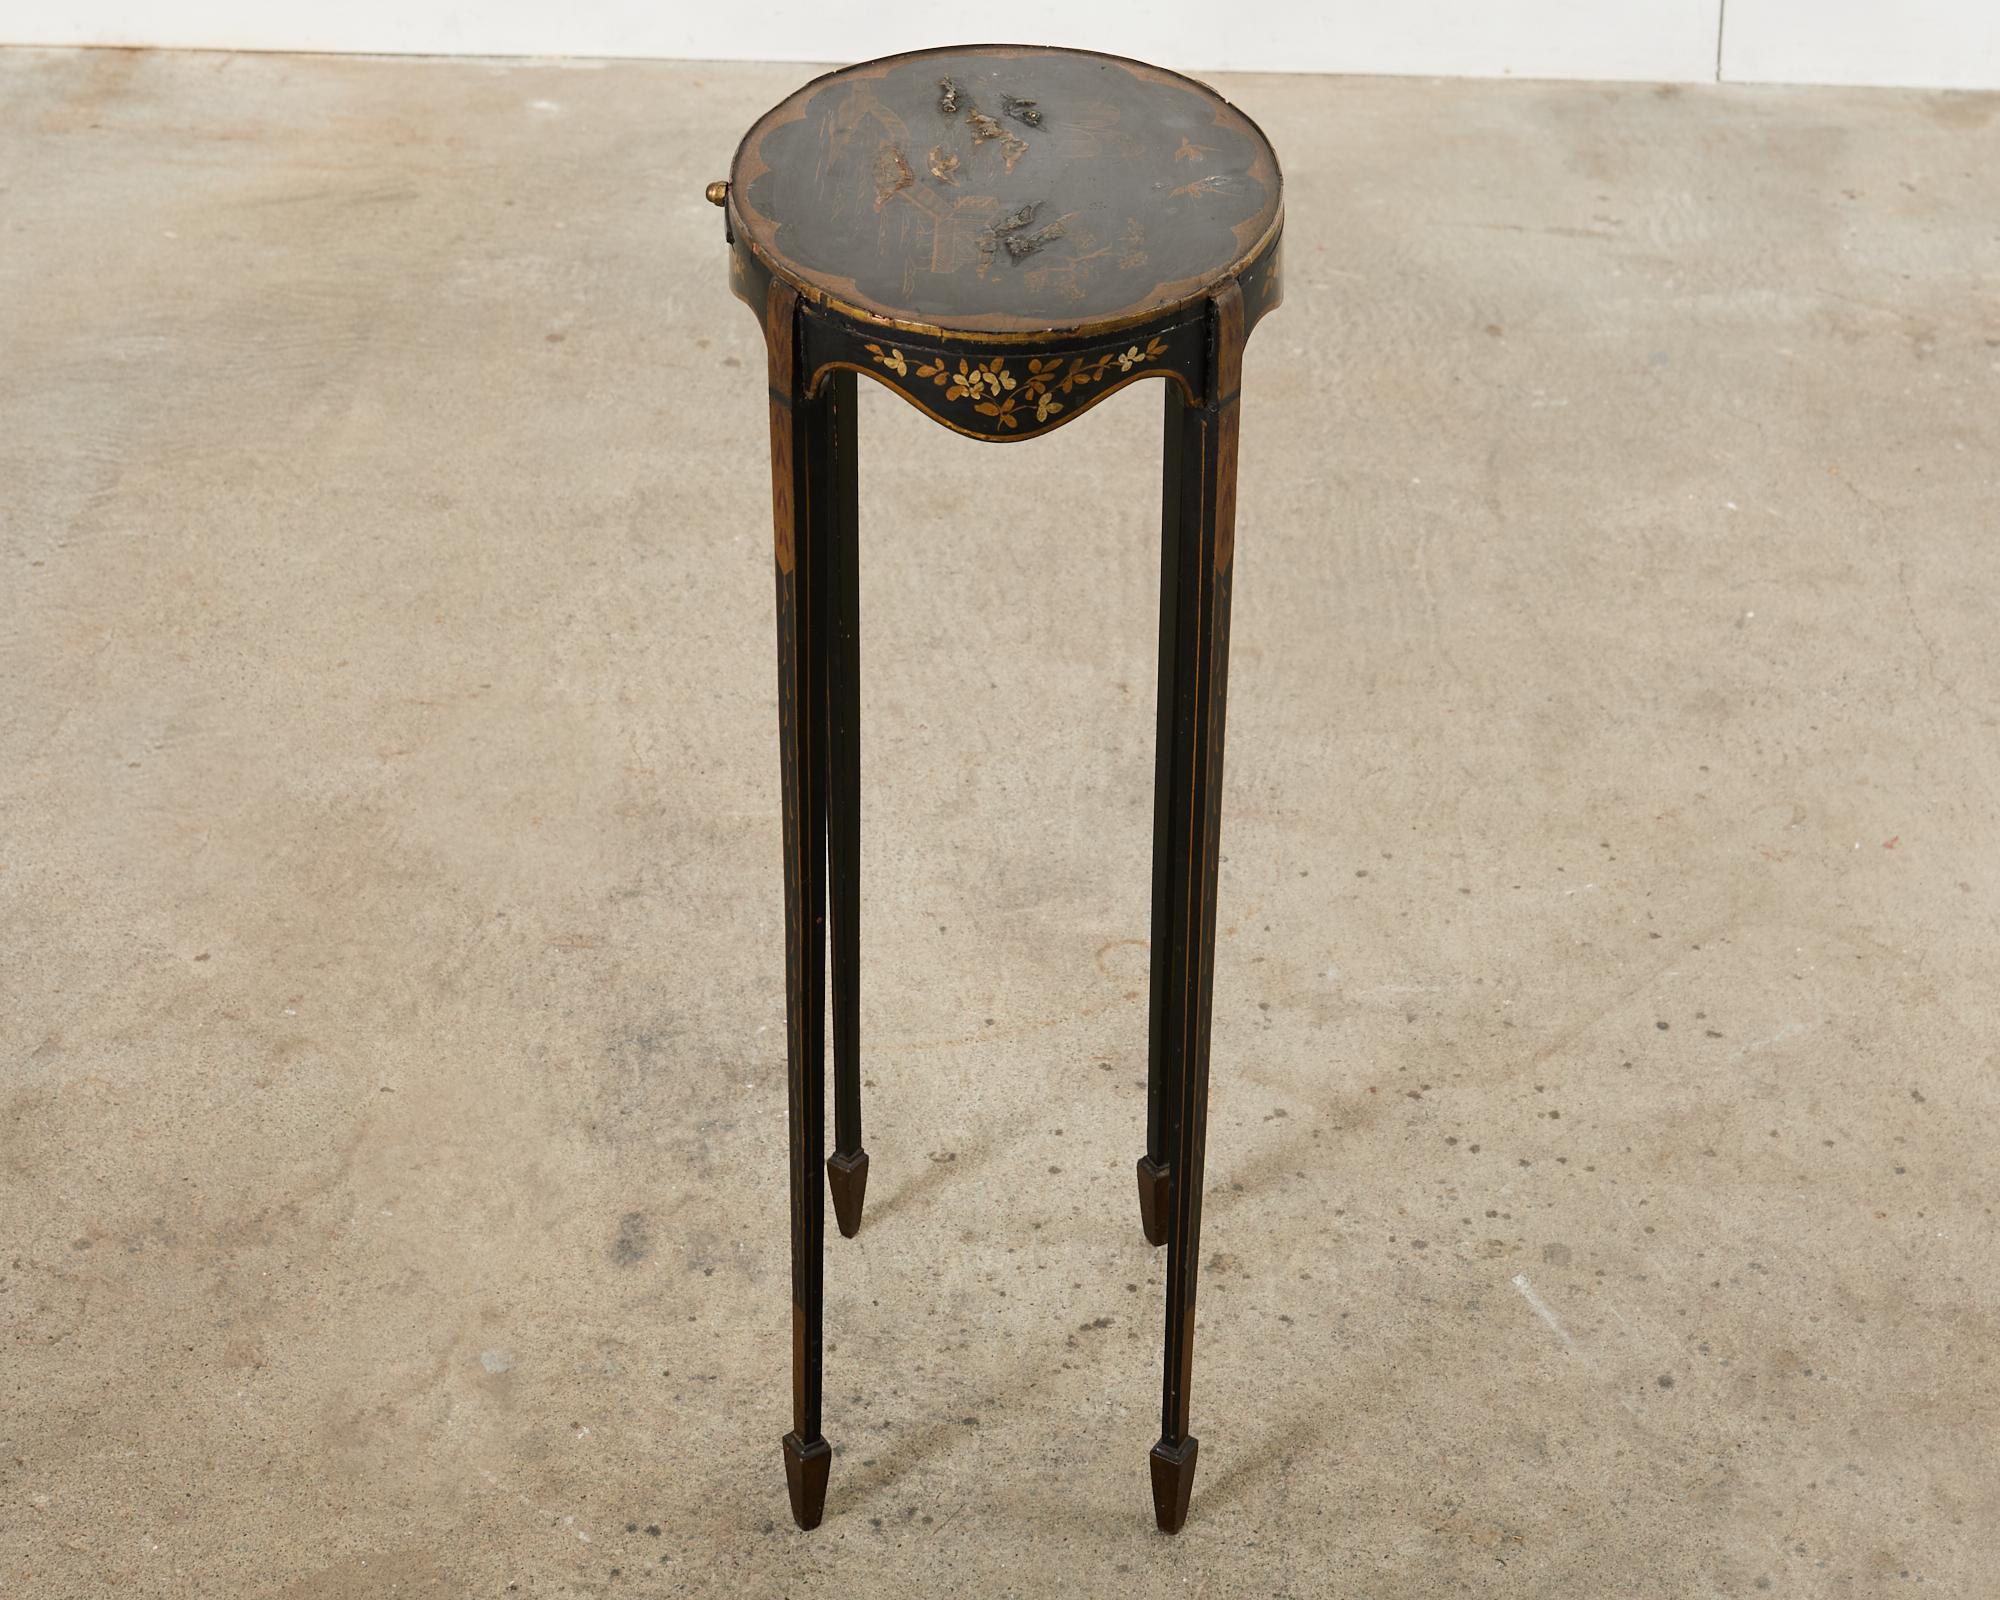 19th Century English Chinoiserie Revival Lacquered Drinks Table For Sale 10